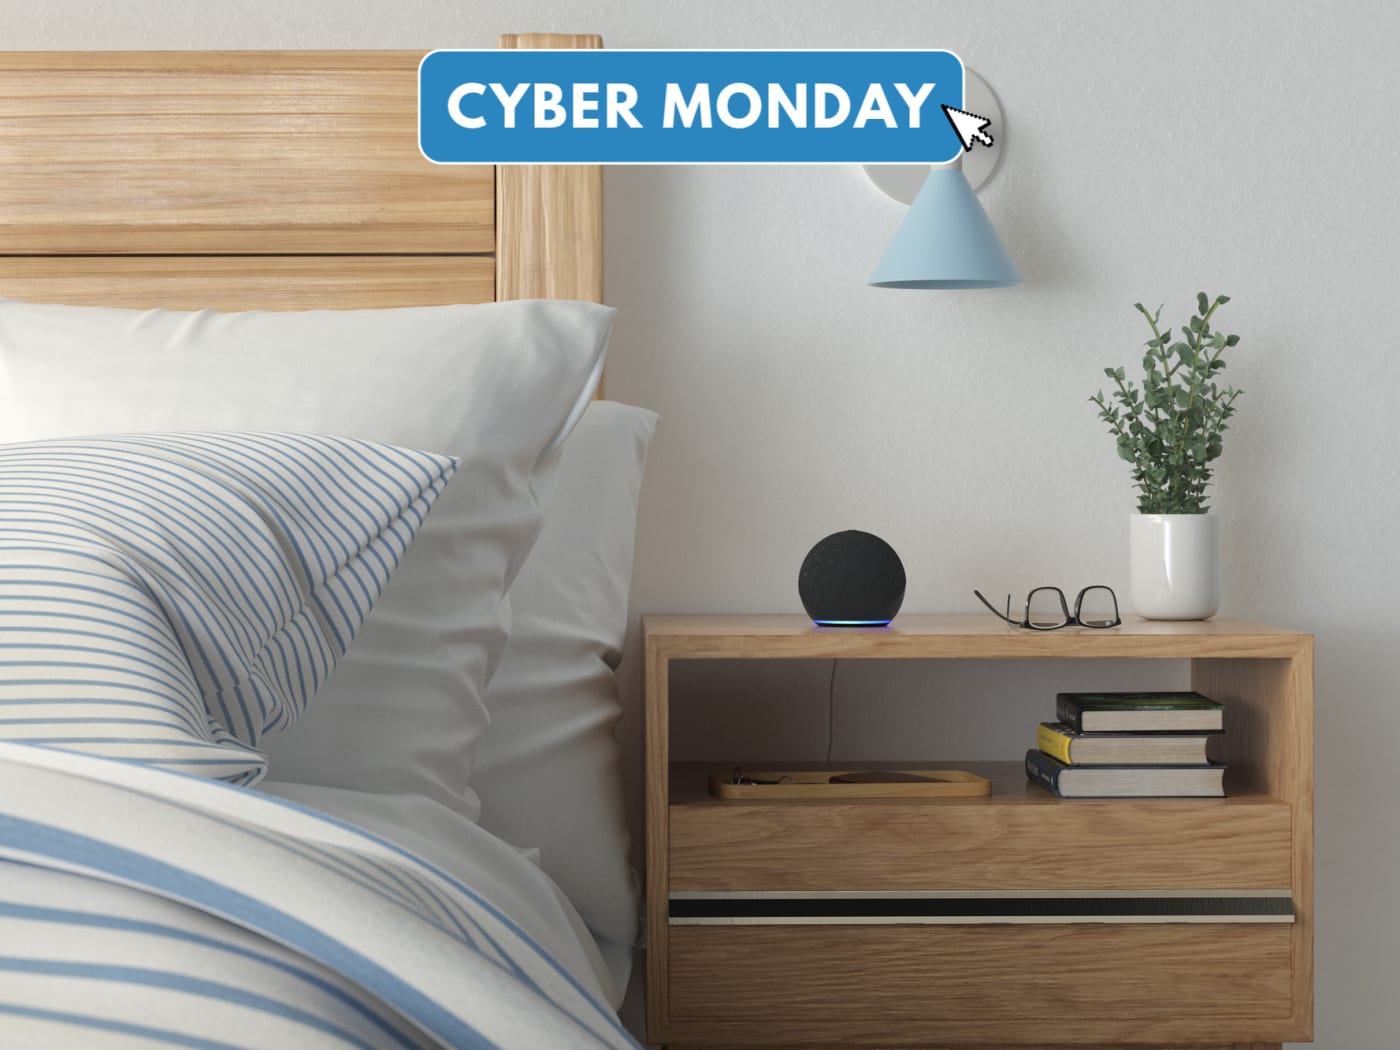 The best Cyber Monday deals on Amazon devices that are still live today